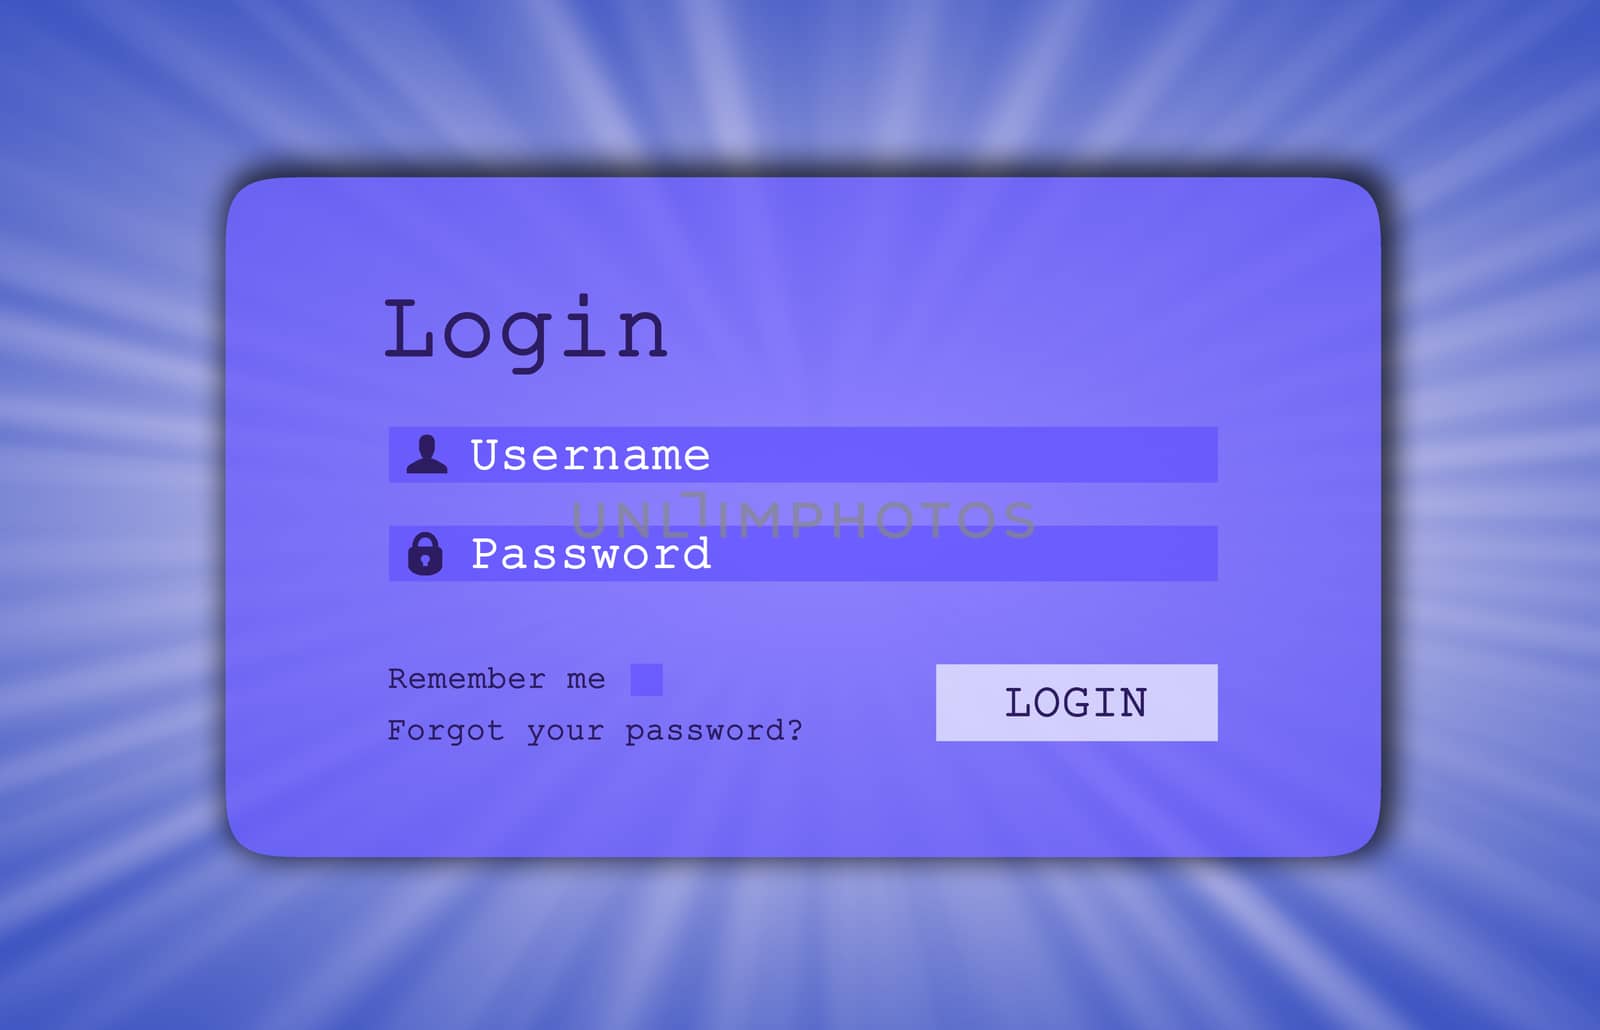 Login interface - username and password by michaklootwijk